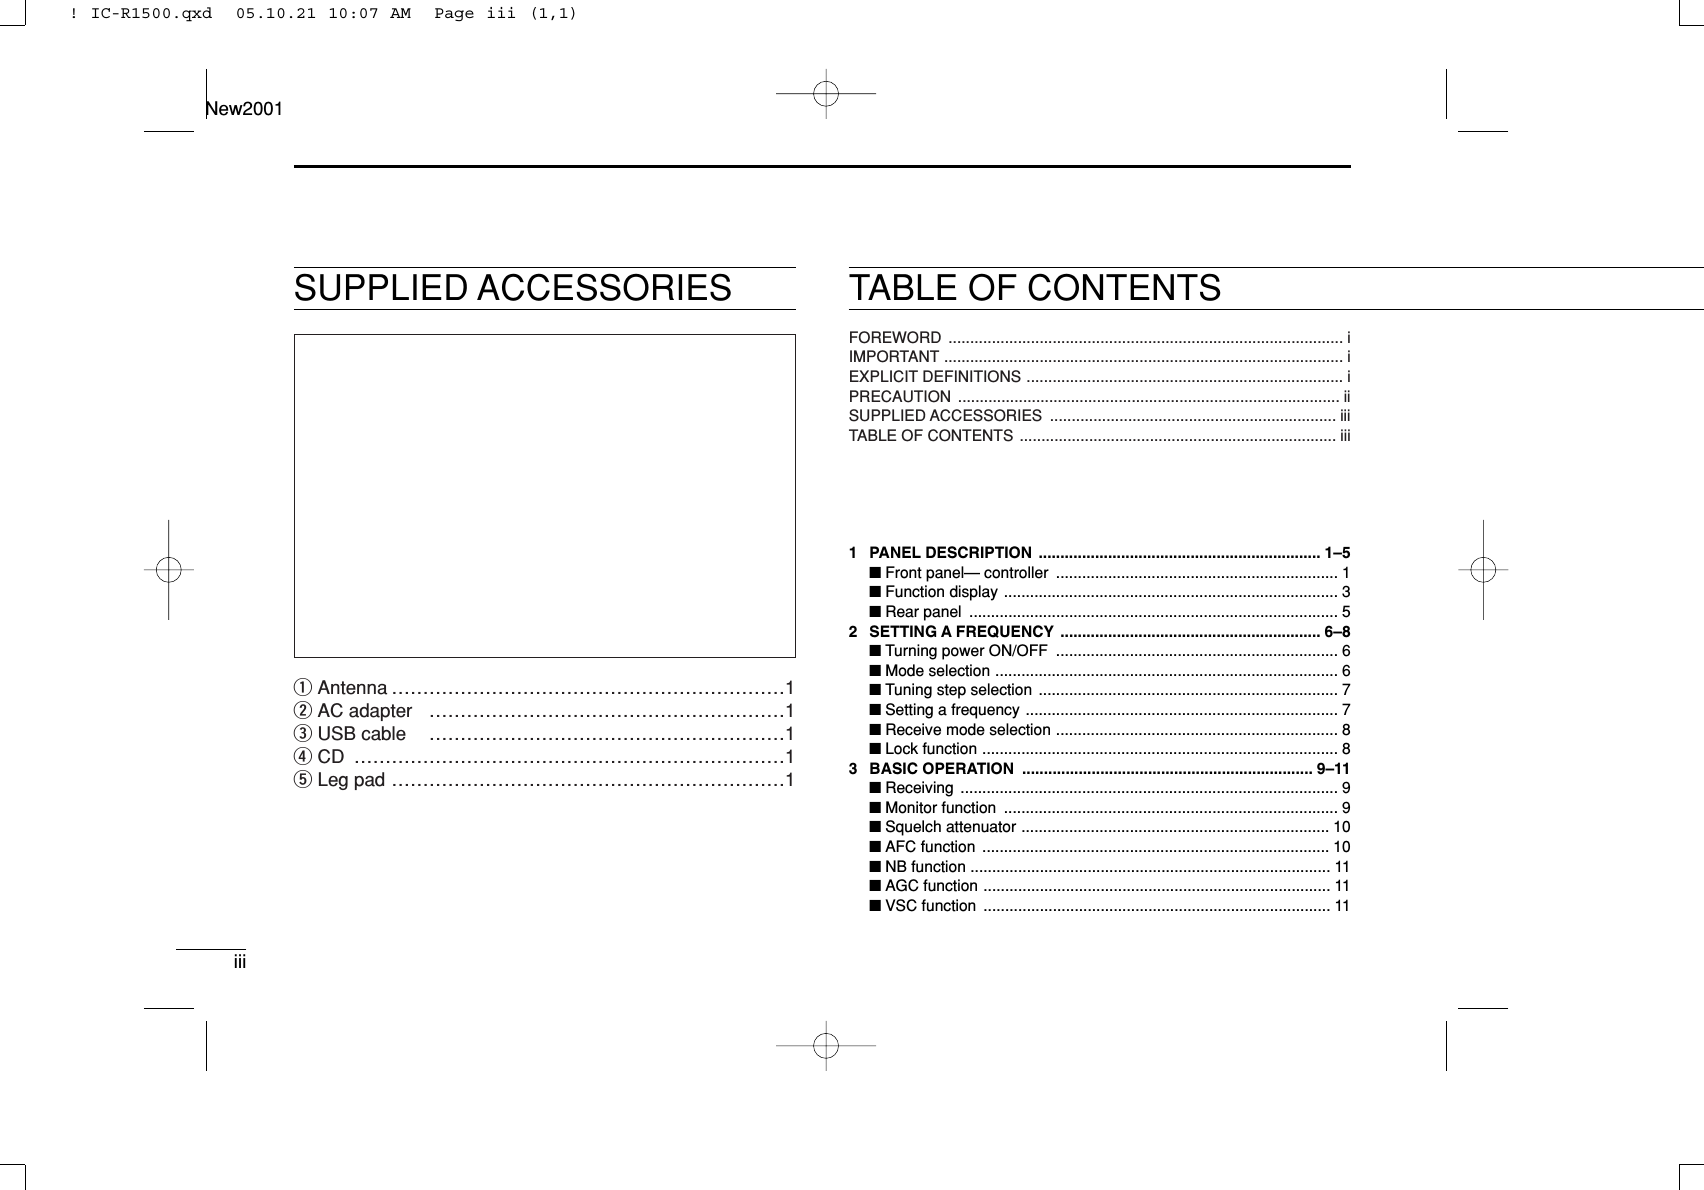 iiiNew2001TABLE OF CONTENTSSUPPLIED ACCESSORIESqAntenna ………………………………………………………1wAC adapter …………………………………………………1eUSB cable …………………………………………………1rCD ……………………………………………………………1tLeg pad ………………………………………………………1FOREWORD ........................................................................................... iIMPORTANT ............................................................................................ iEXPLICIT DEFINITIONS ......................................................................... iPRECAUTION ........................................................................................ iiSUPPLIED ACCESSORIES .................................................................. iiiTABLE OF CONTENTS ......................................................................... iiiQUICK REFERENCE GUIDE ............................................................. I–X■Installation ....................................................................................... I■Your ﬁrst contact .......................................................................... VII■Repeater operation ....................................................................... IX■Programming memory channels..................................................... X1 PANEL DESCRIPTION ................................................................. 1–5■Front panel— controller ................................................................. 1■Function display ............................................................................. 3■Rear panel ..................................................................................... 52 SETTING A FREQUENCY ............................................................ 6–8■Turning power ON/OFF ................................................................. 6■Mode selection ............................................................................... 6■Tuning step selection ..................................................................... 7■Setting a frequency ........................................................................ 7■Receive mode selection ................................................................. 8■Lock function .................................................................................. 83 BASIC OPERATION ................................................................... 9–11■Receiving ....................................................................................... 9■Monitor function ............................................................................. 9■Squelch attenuator ....................................................................... 10■AFC function ................................................................................ 10■NB function ................................................................................... 11■AGC function ................................................................................ 11■VSC function ................................................................................ 11! IC-R1500.qxd  05.10.21 10:07 AM  Page iii (1,1)